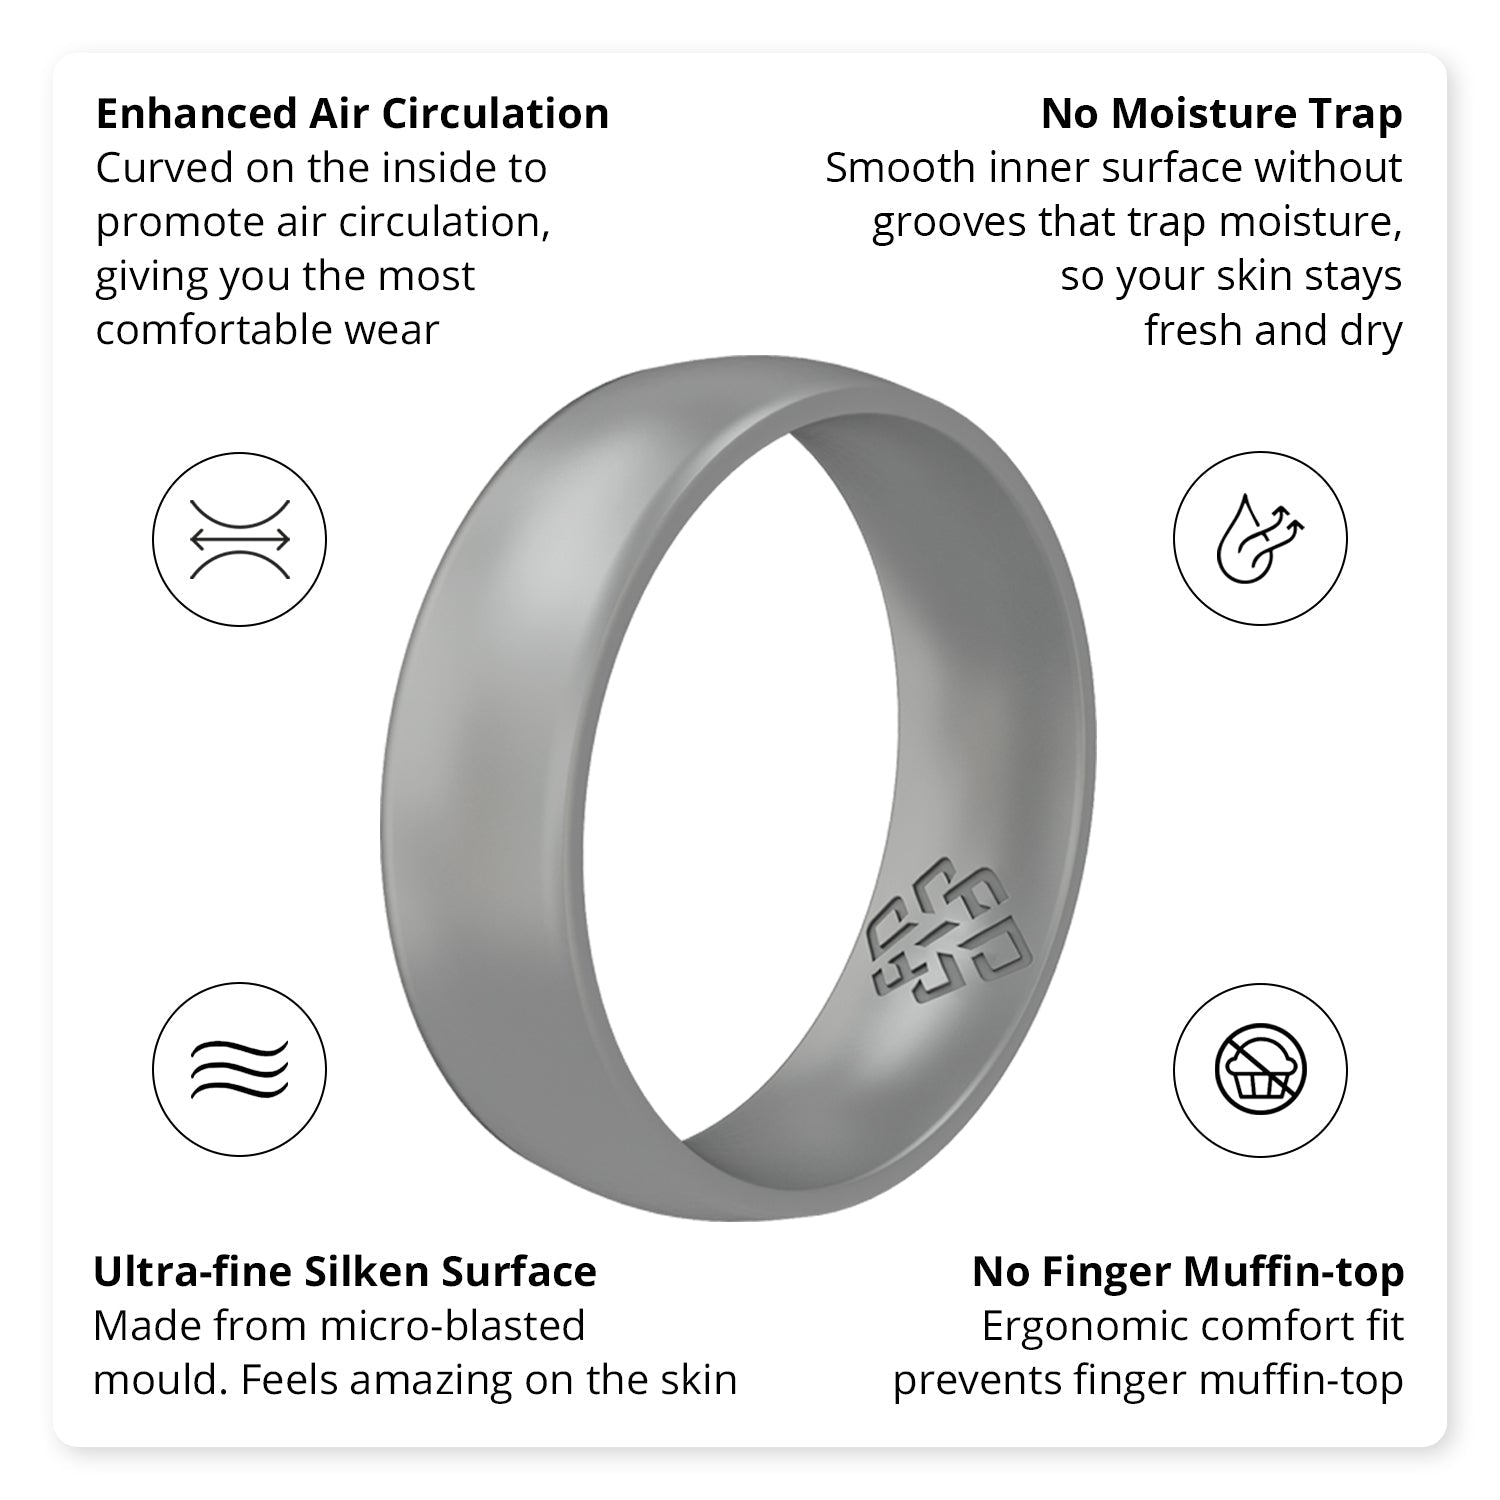 Smooth Silver Breathable Silicone Ring For Men and Women - Knot Theory